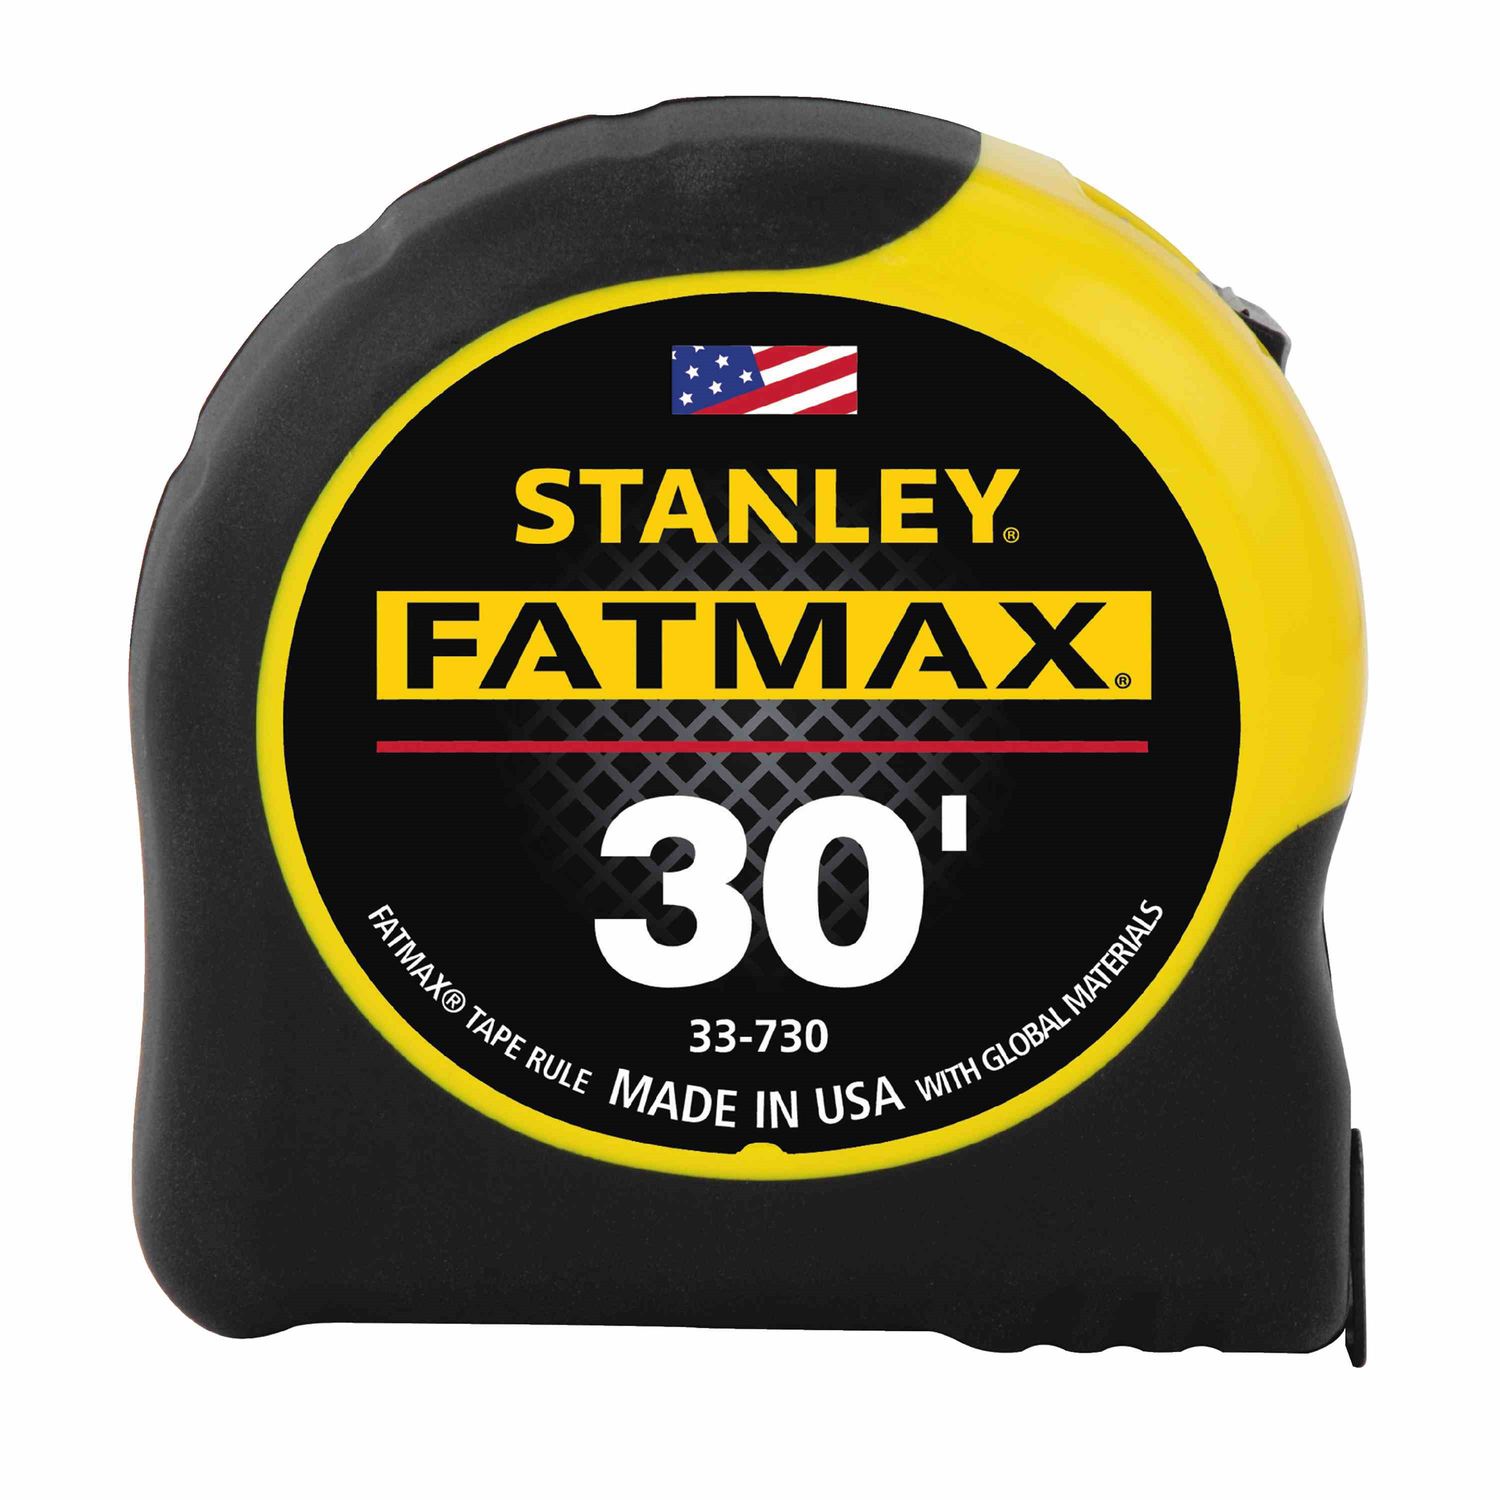 Photos - Tape Measure and Surveyor Tape Stanley FatMax 30 ft. L X 1.25 in. W Tape Measure 1 pk 33-730 